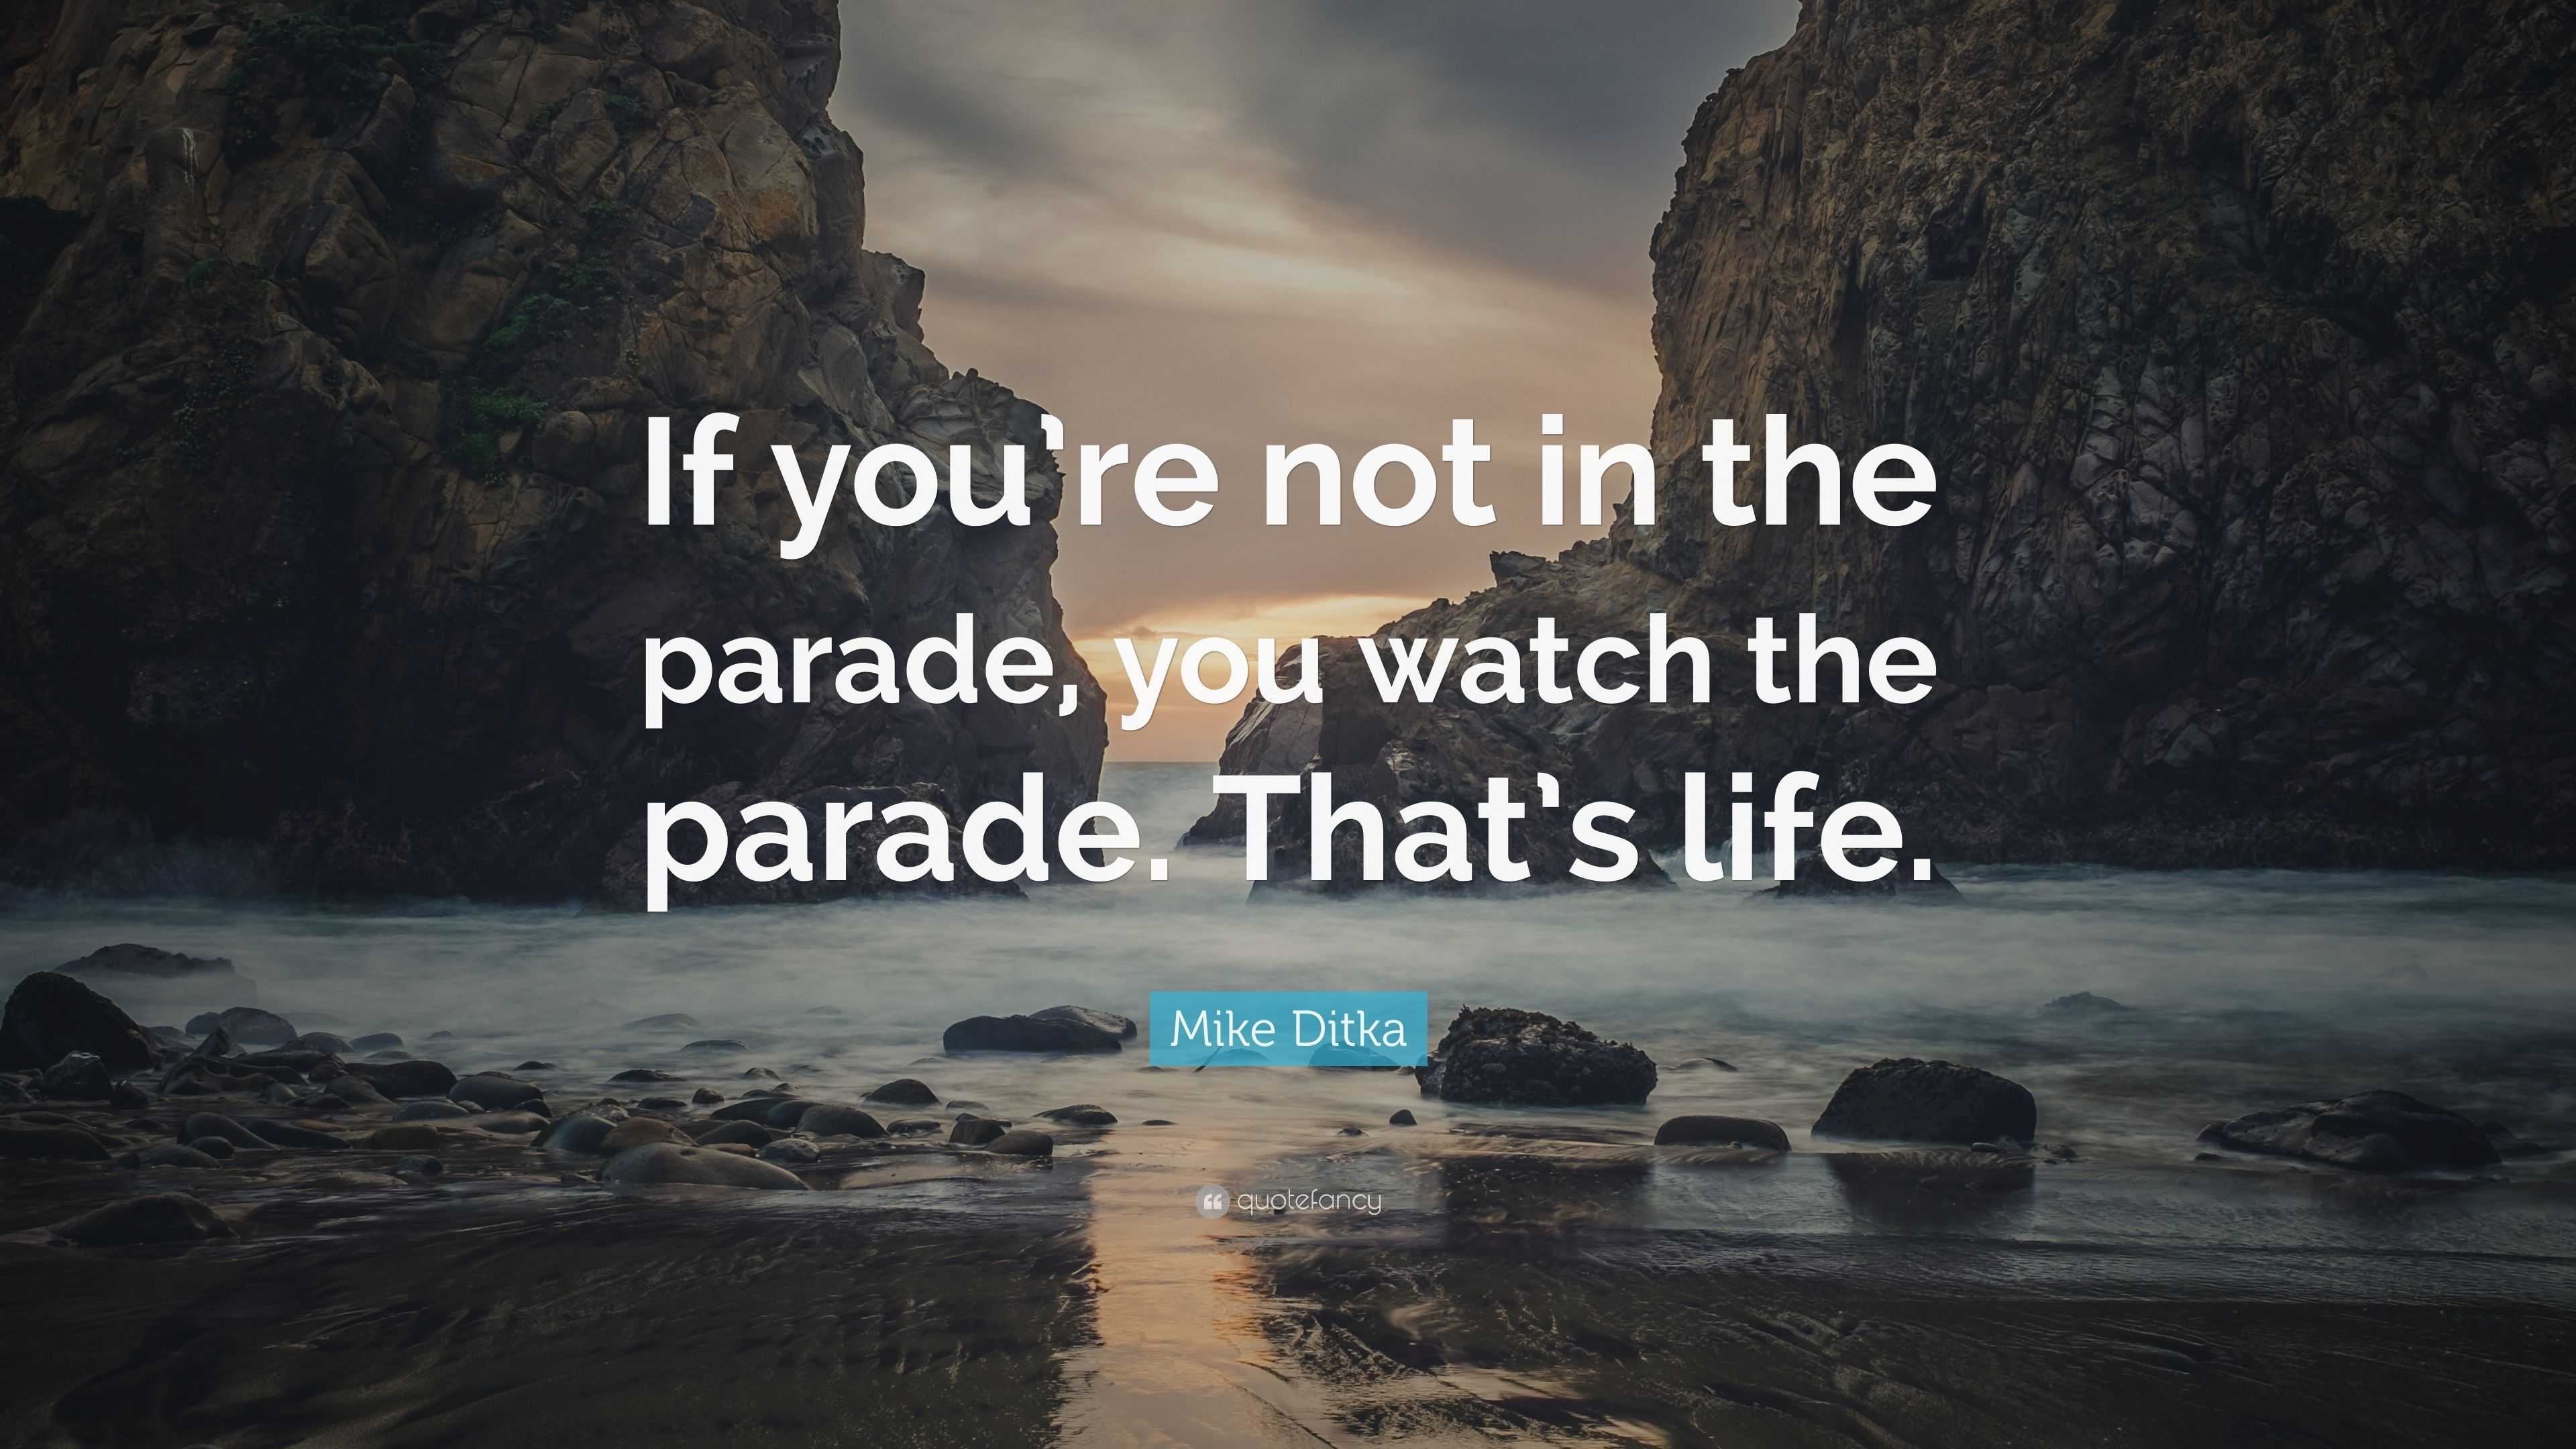 Mike Ditka Quote: “If you’re not in the parade, you watch the parade